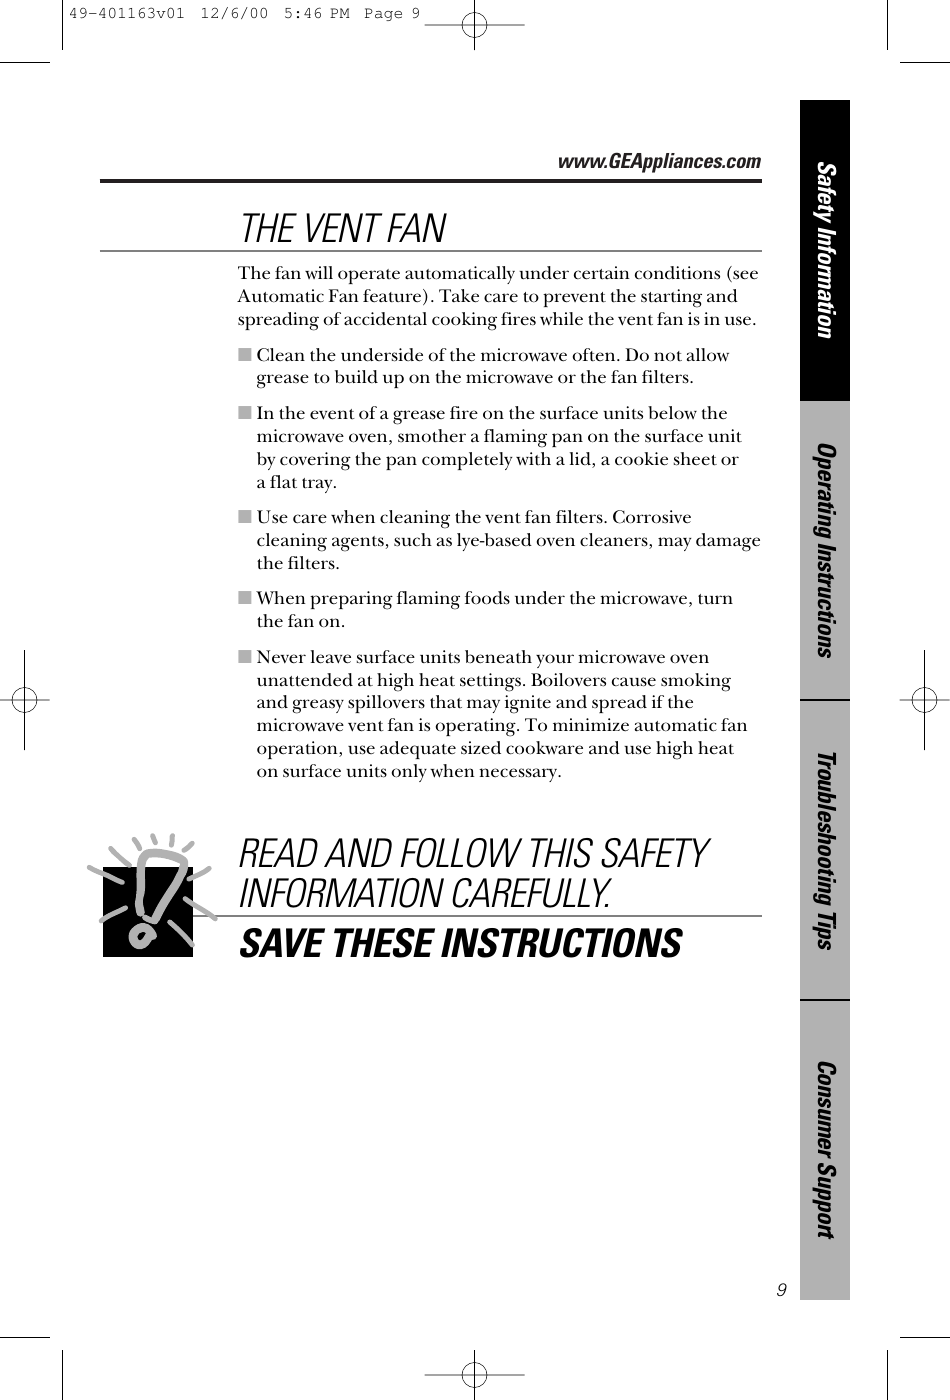 www.GEAppliances.comConsumer SupportTroubleshooting TipsOperating InstructionsSafety Information9The fan will operate automatically under certain conditions (seeAutomatic Fan feature). Take care to prevent the starting andspreading of accidental cooking fires while the vent fan is in use. ■Clean the underside of the microwave often. Do not allowgrease to build up on the microwave or the fan filters.■In the event of a grease fire on the surface units below themicrowave oven, smother a flaming pan on the surface unitby covering the pan completely with a lid, a cookie sheet or a flat tray.■Use care when cleaning the vent fan filters. Corrosivecleaning agents, such as lye-based oven cleaners, may damagethe filters.■When preparing flaming foods under the microwave, turnthe fan on. ■Never leave surface units beneath your microwave ovenunattended at high heat settings. Boilovers cause smokingand greasy spillovers that may ignite and spread if themicrowave vent fan is operating. To minimize automatic fanoperation, use adequate sized cookware and use high heat on surface units only when necessary.THE VENT FANREAD AND FOLLOW THIS SAFETYINFORMATION CAREFULLY.SAVE THESE INSTRUCTIONS49-401163v01  12/6/00  5:46 PM  Page 9